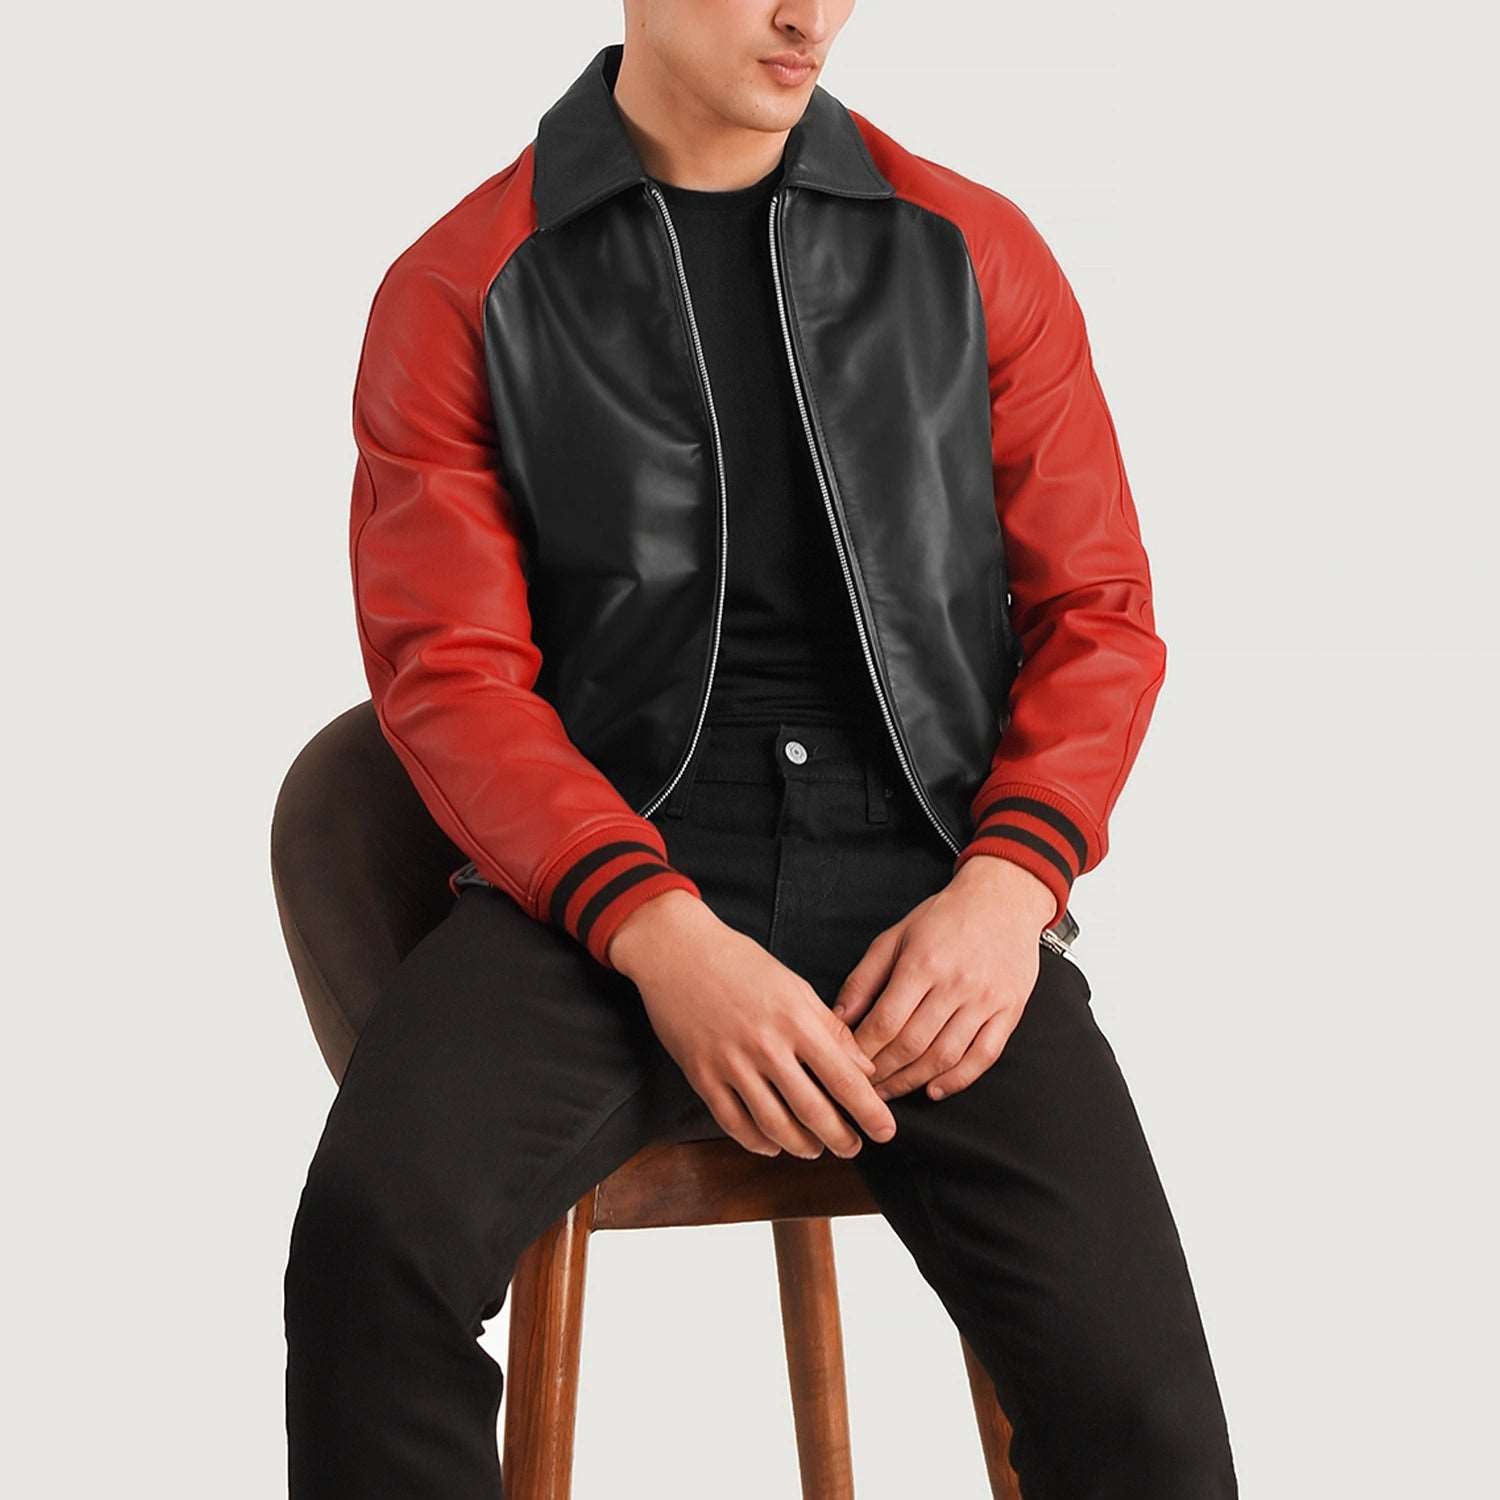 Mens Black And Red Bomber Leather Jacket With Shirt Collar  - Leather Jacket